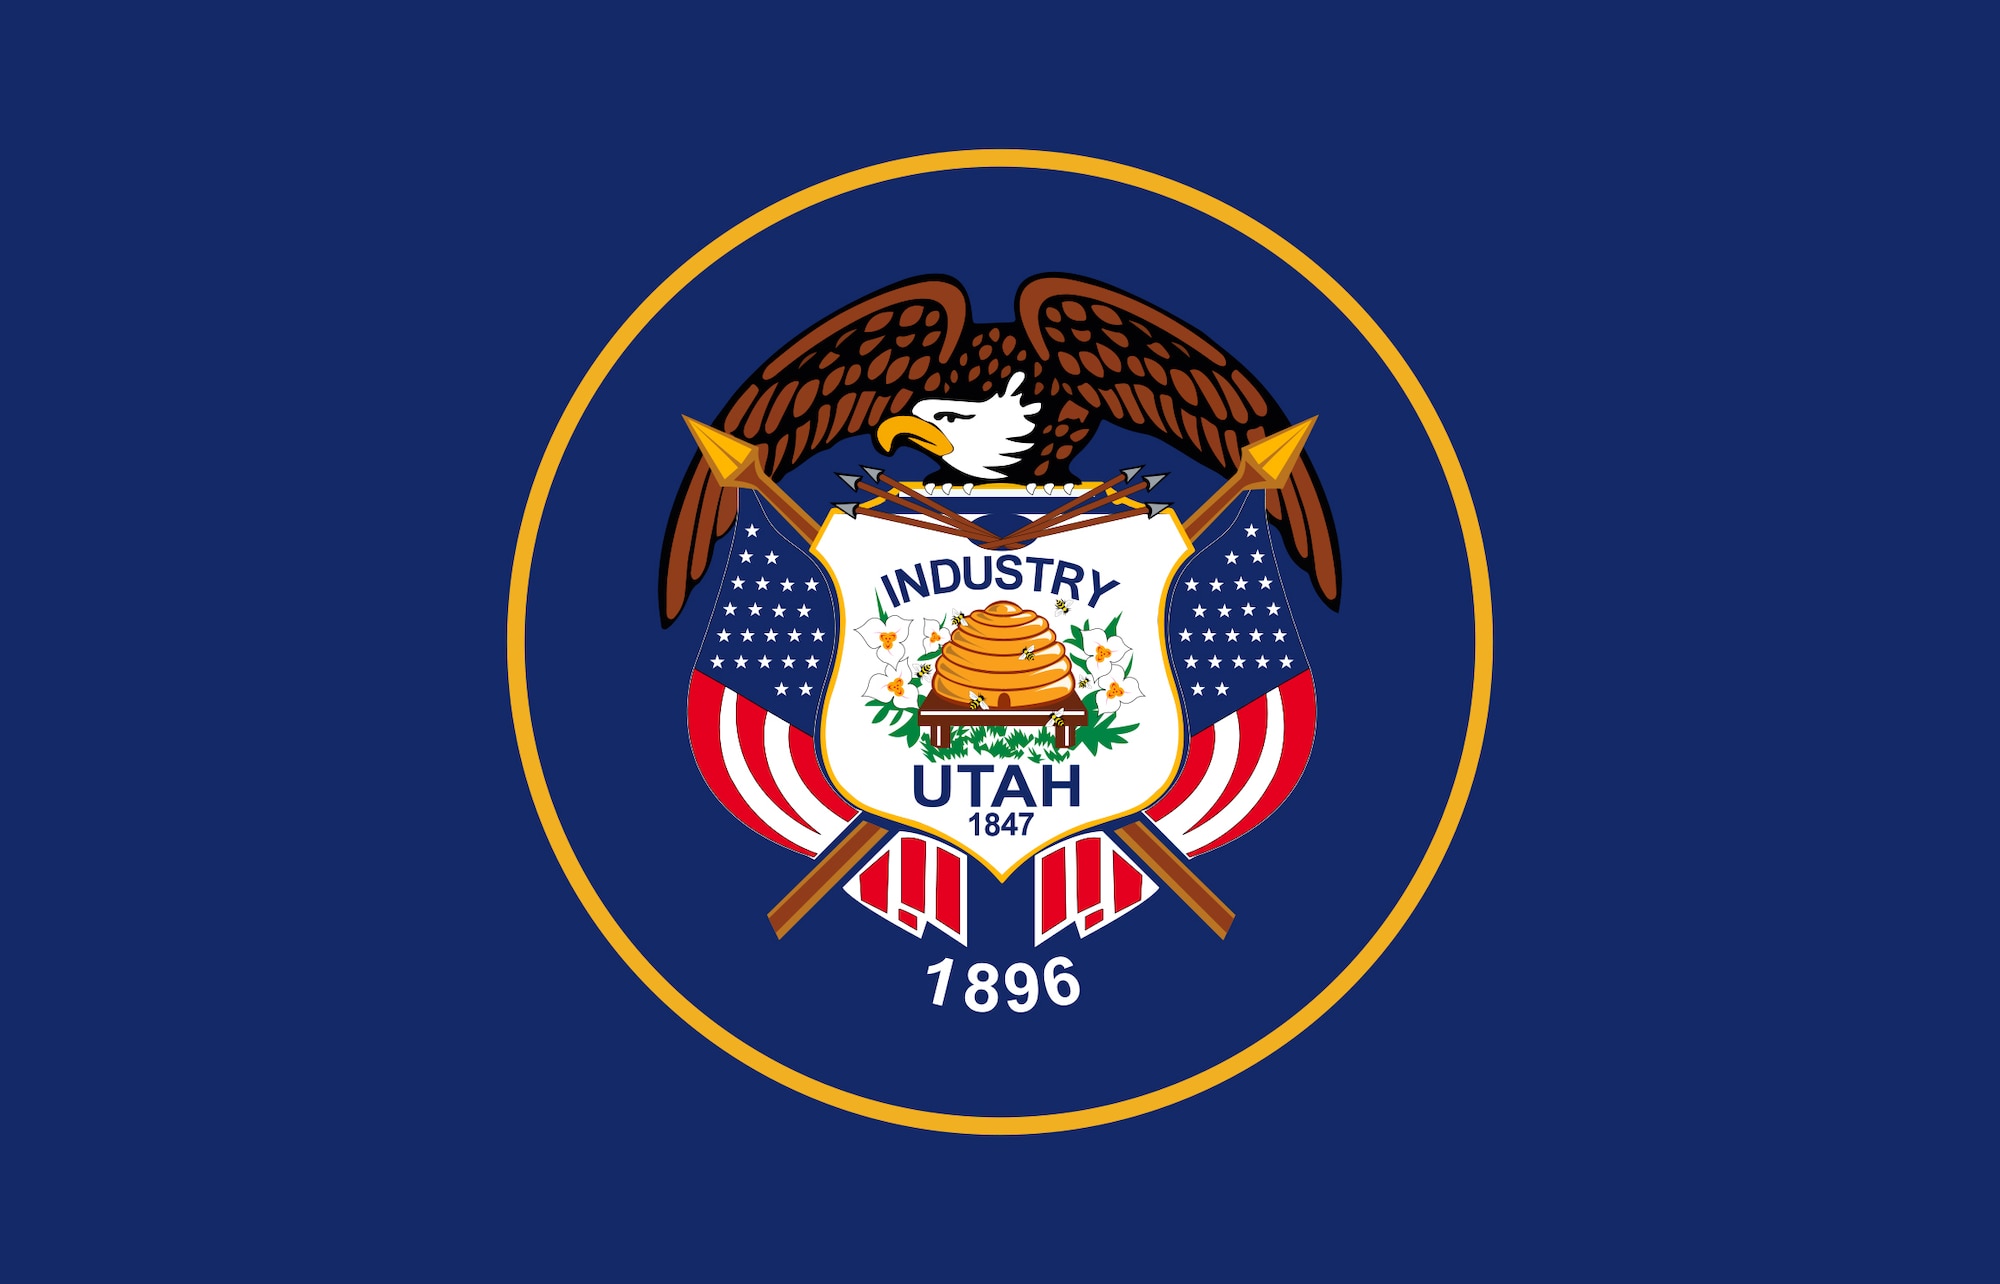 A graphic depicting the Utah's state flag.